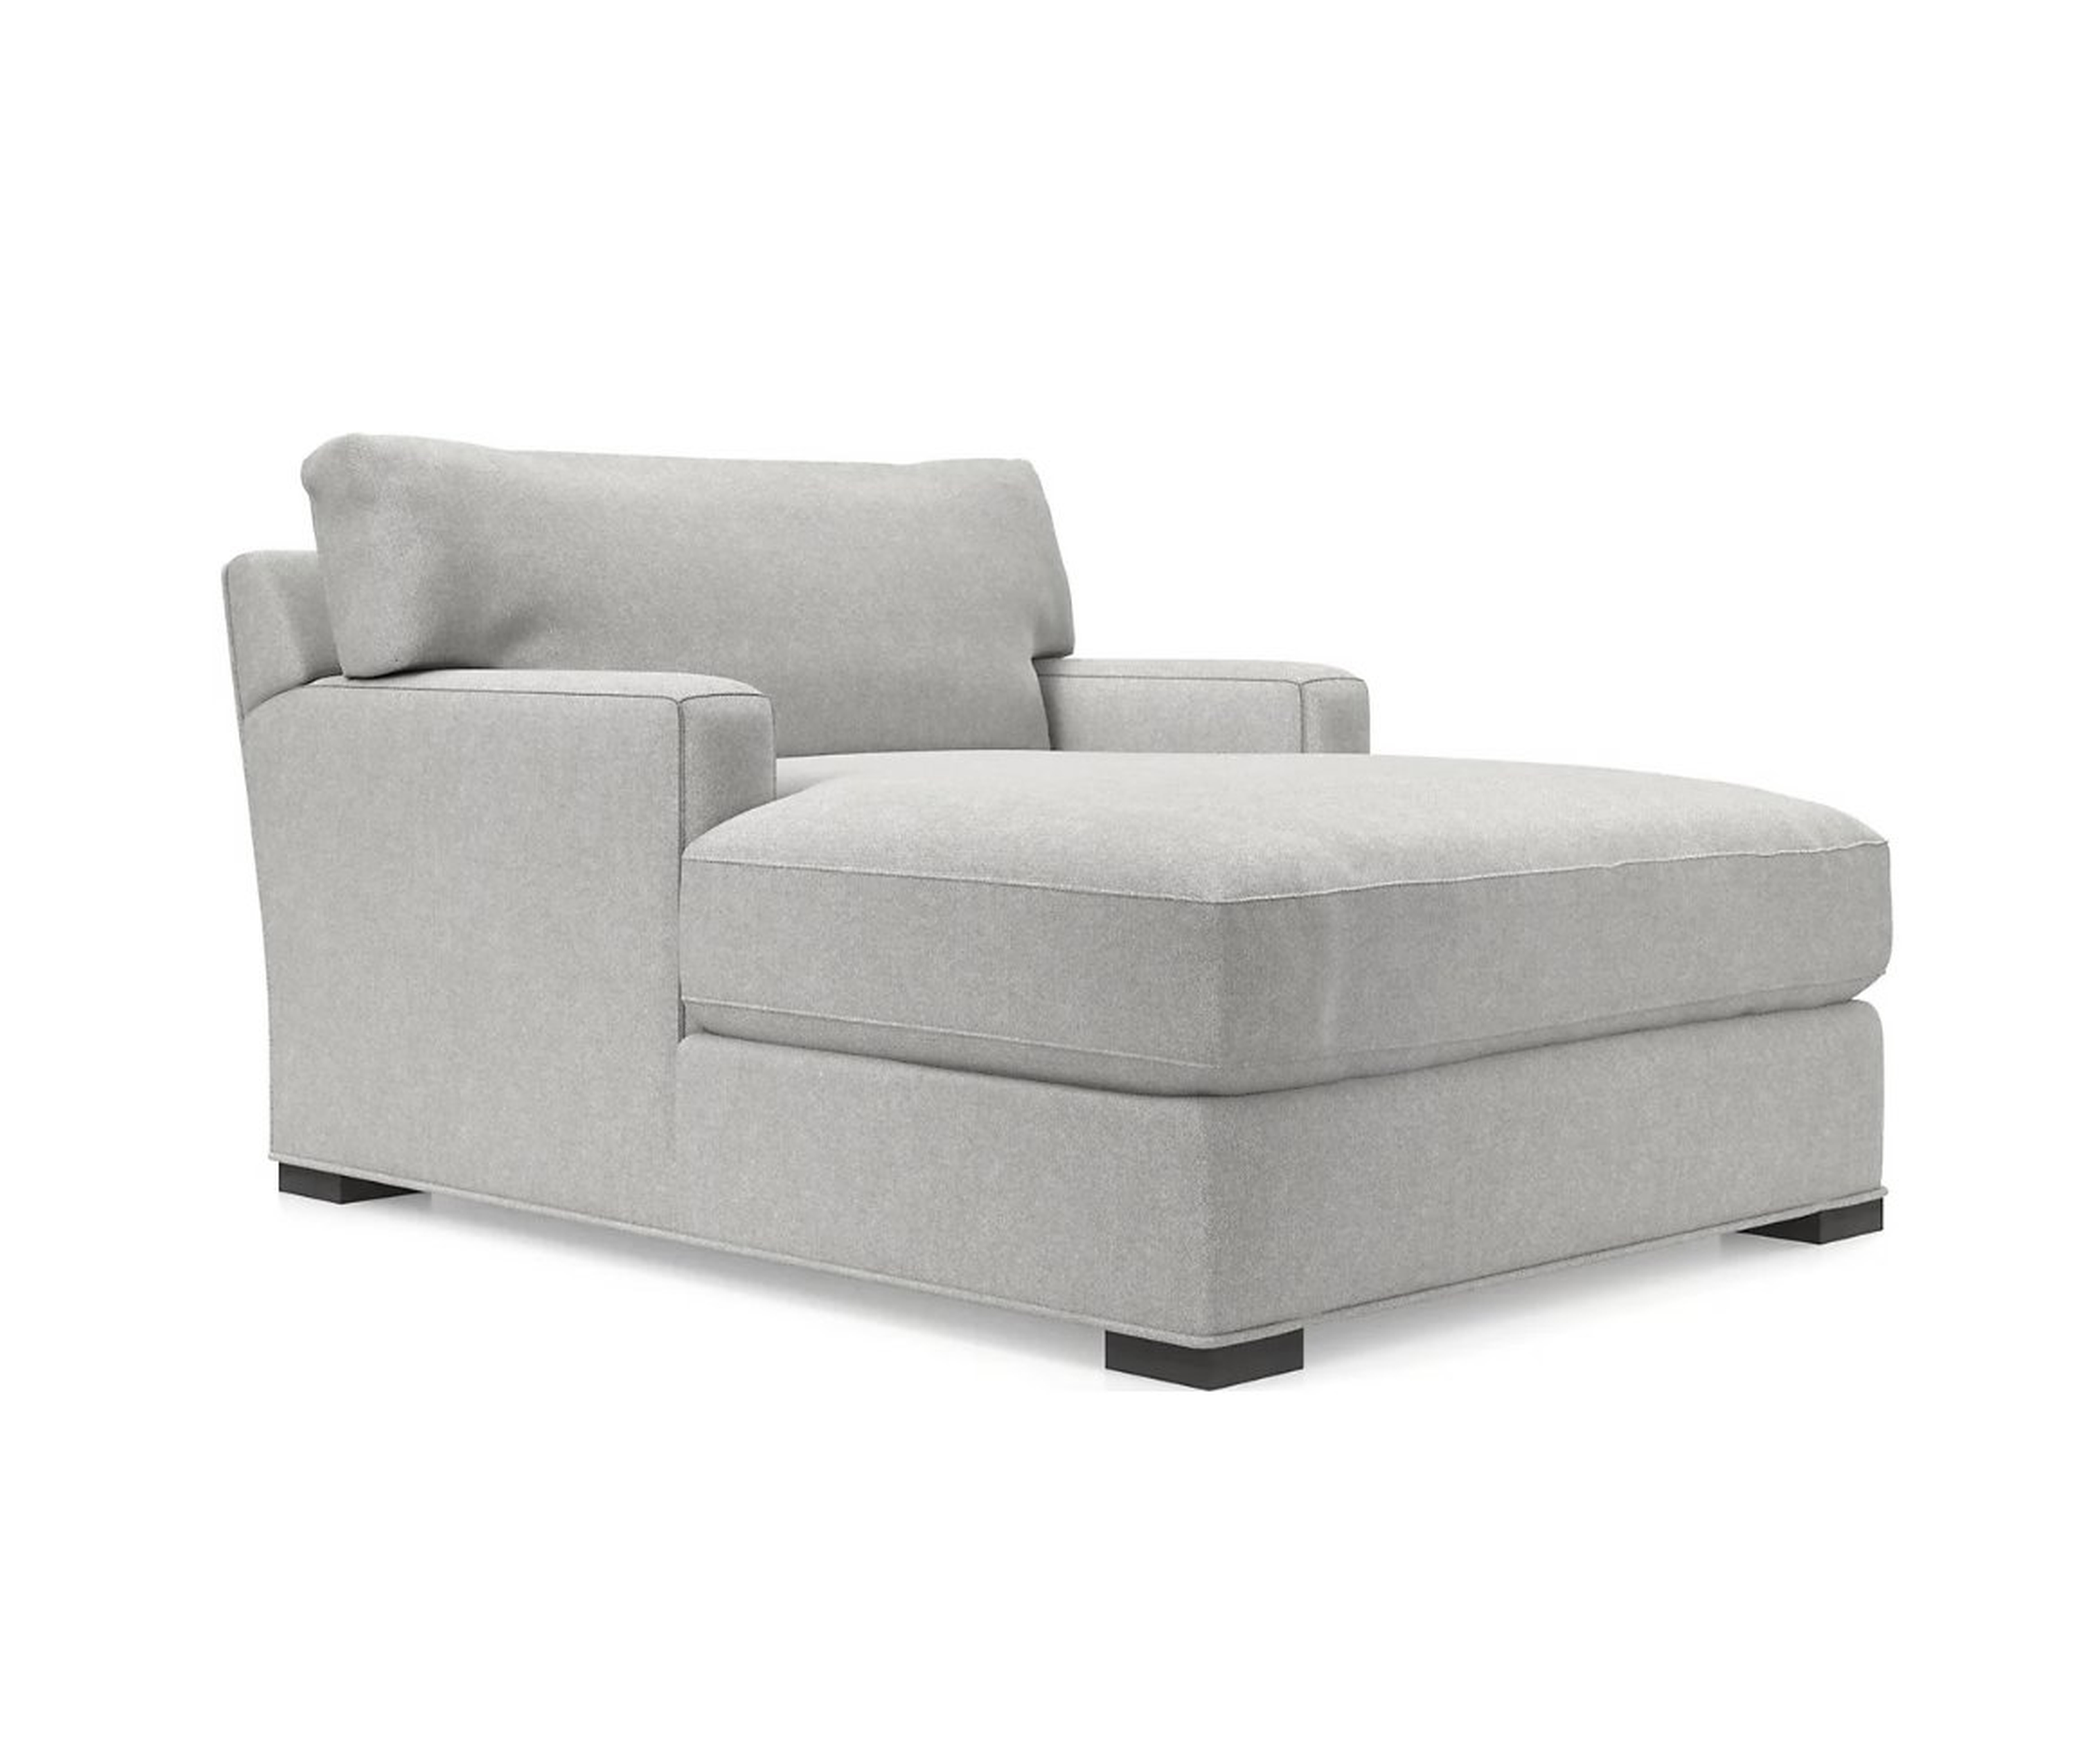 Axis II Chaise Lounge - Douglas Lace, Pecan leg - Crate and Barrel